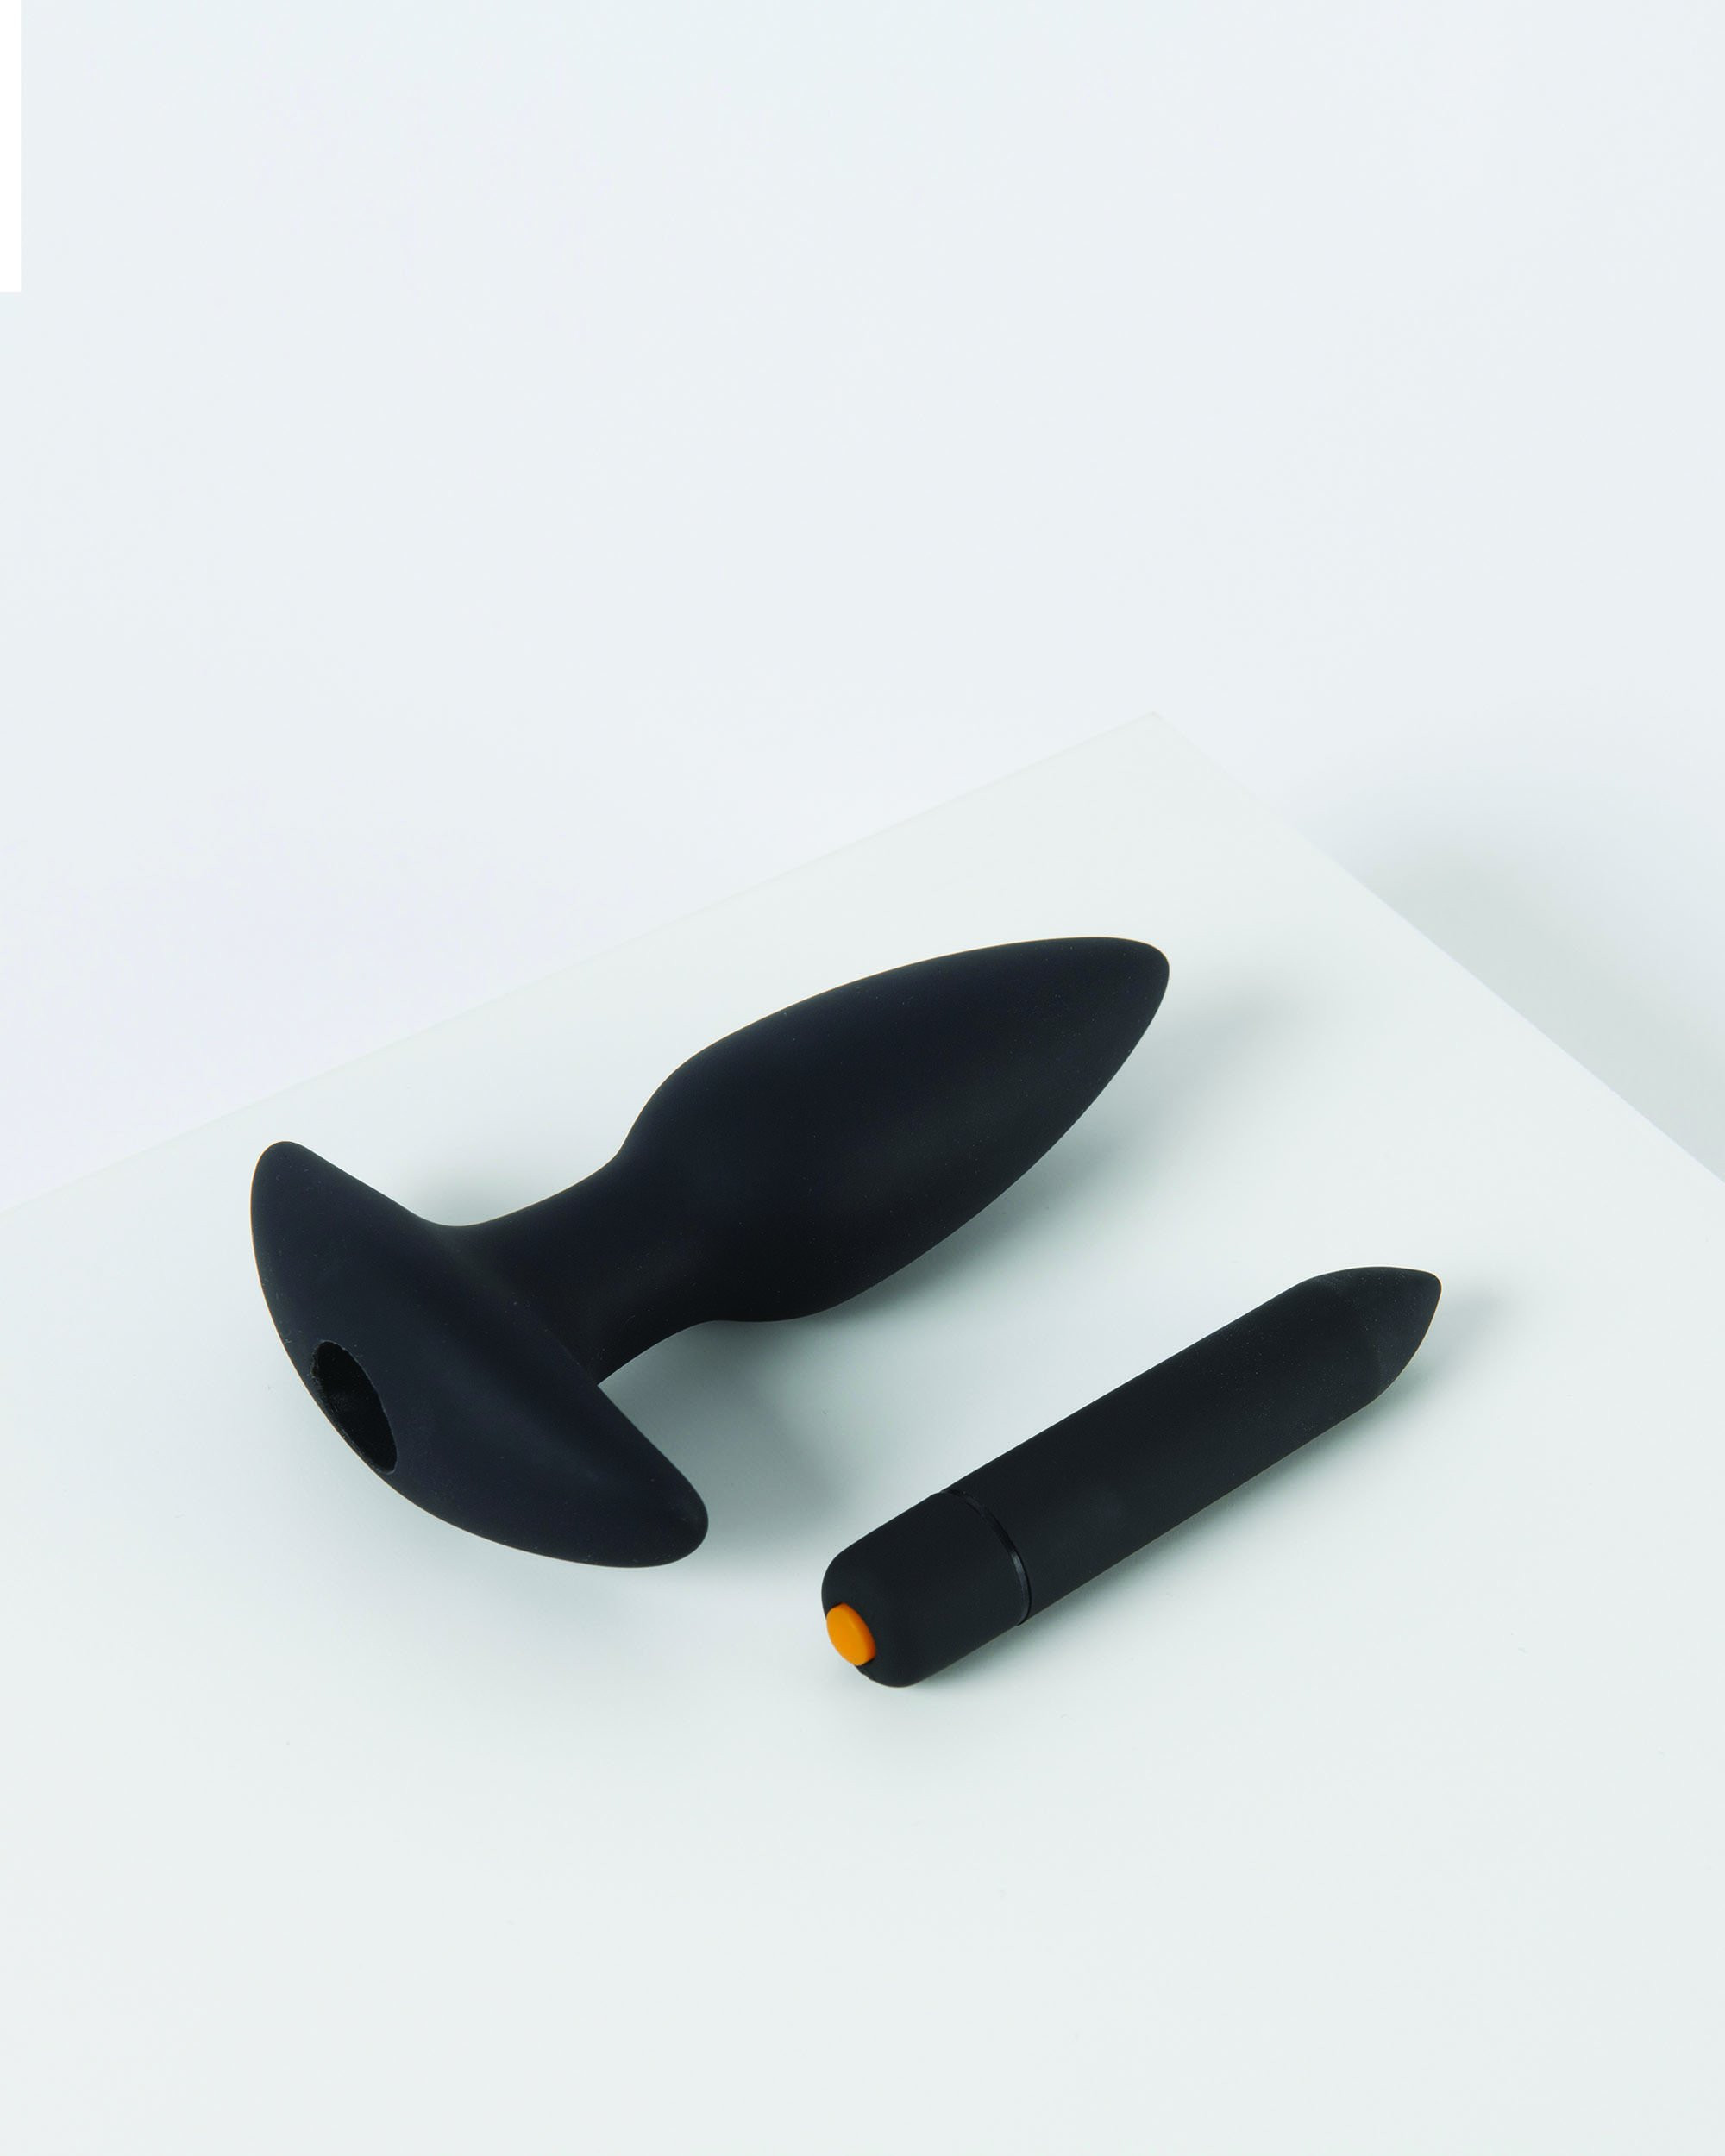 Take anal to the next level with the Vibrating Butt Plug. Featuring a removable bullet vibrator with 7 intense speed settings, this plug gives you 2 toys in 1. Shaped with a smooth, tapered tip and flared base as a comfortable handle, this plug is design #sex